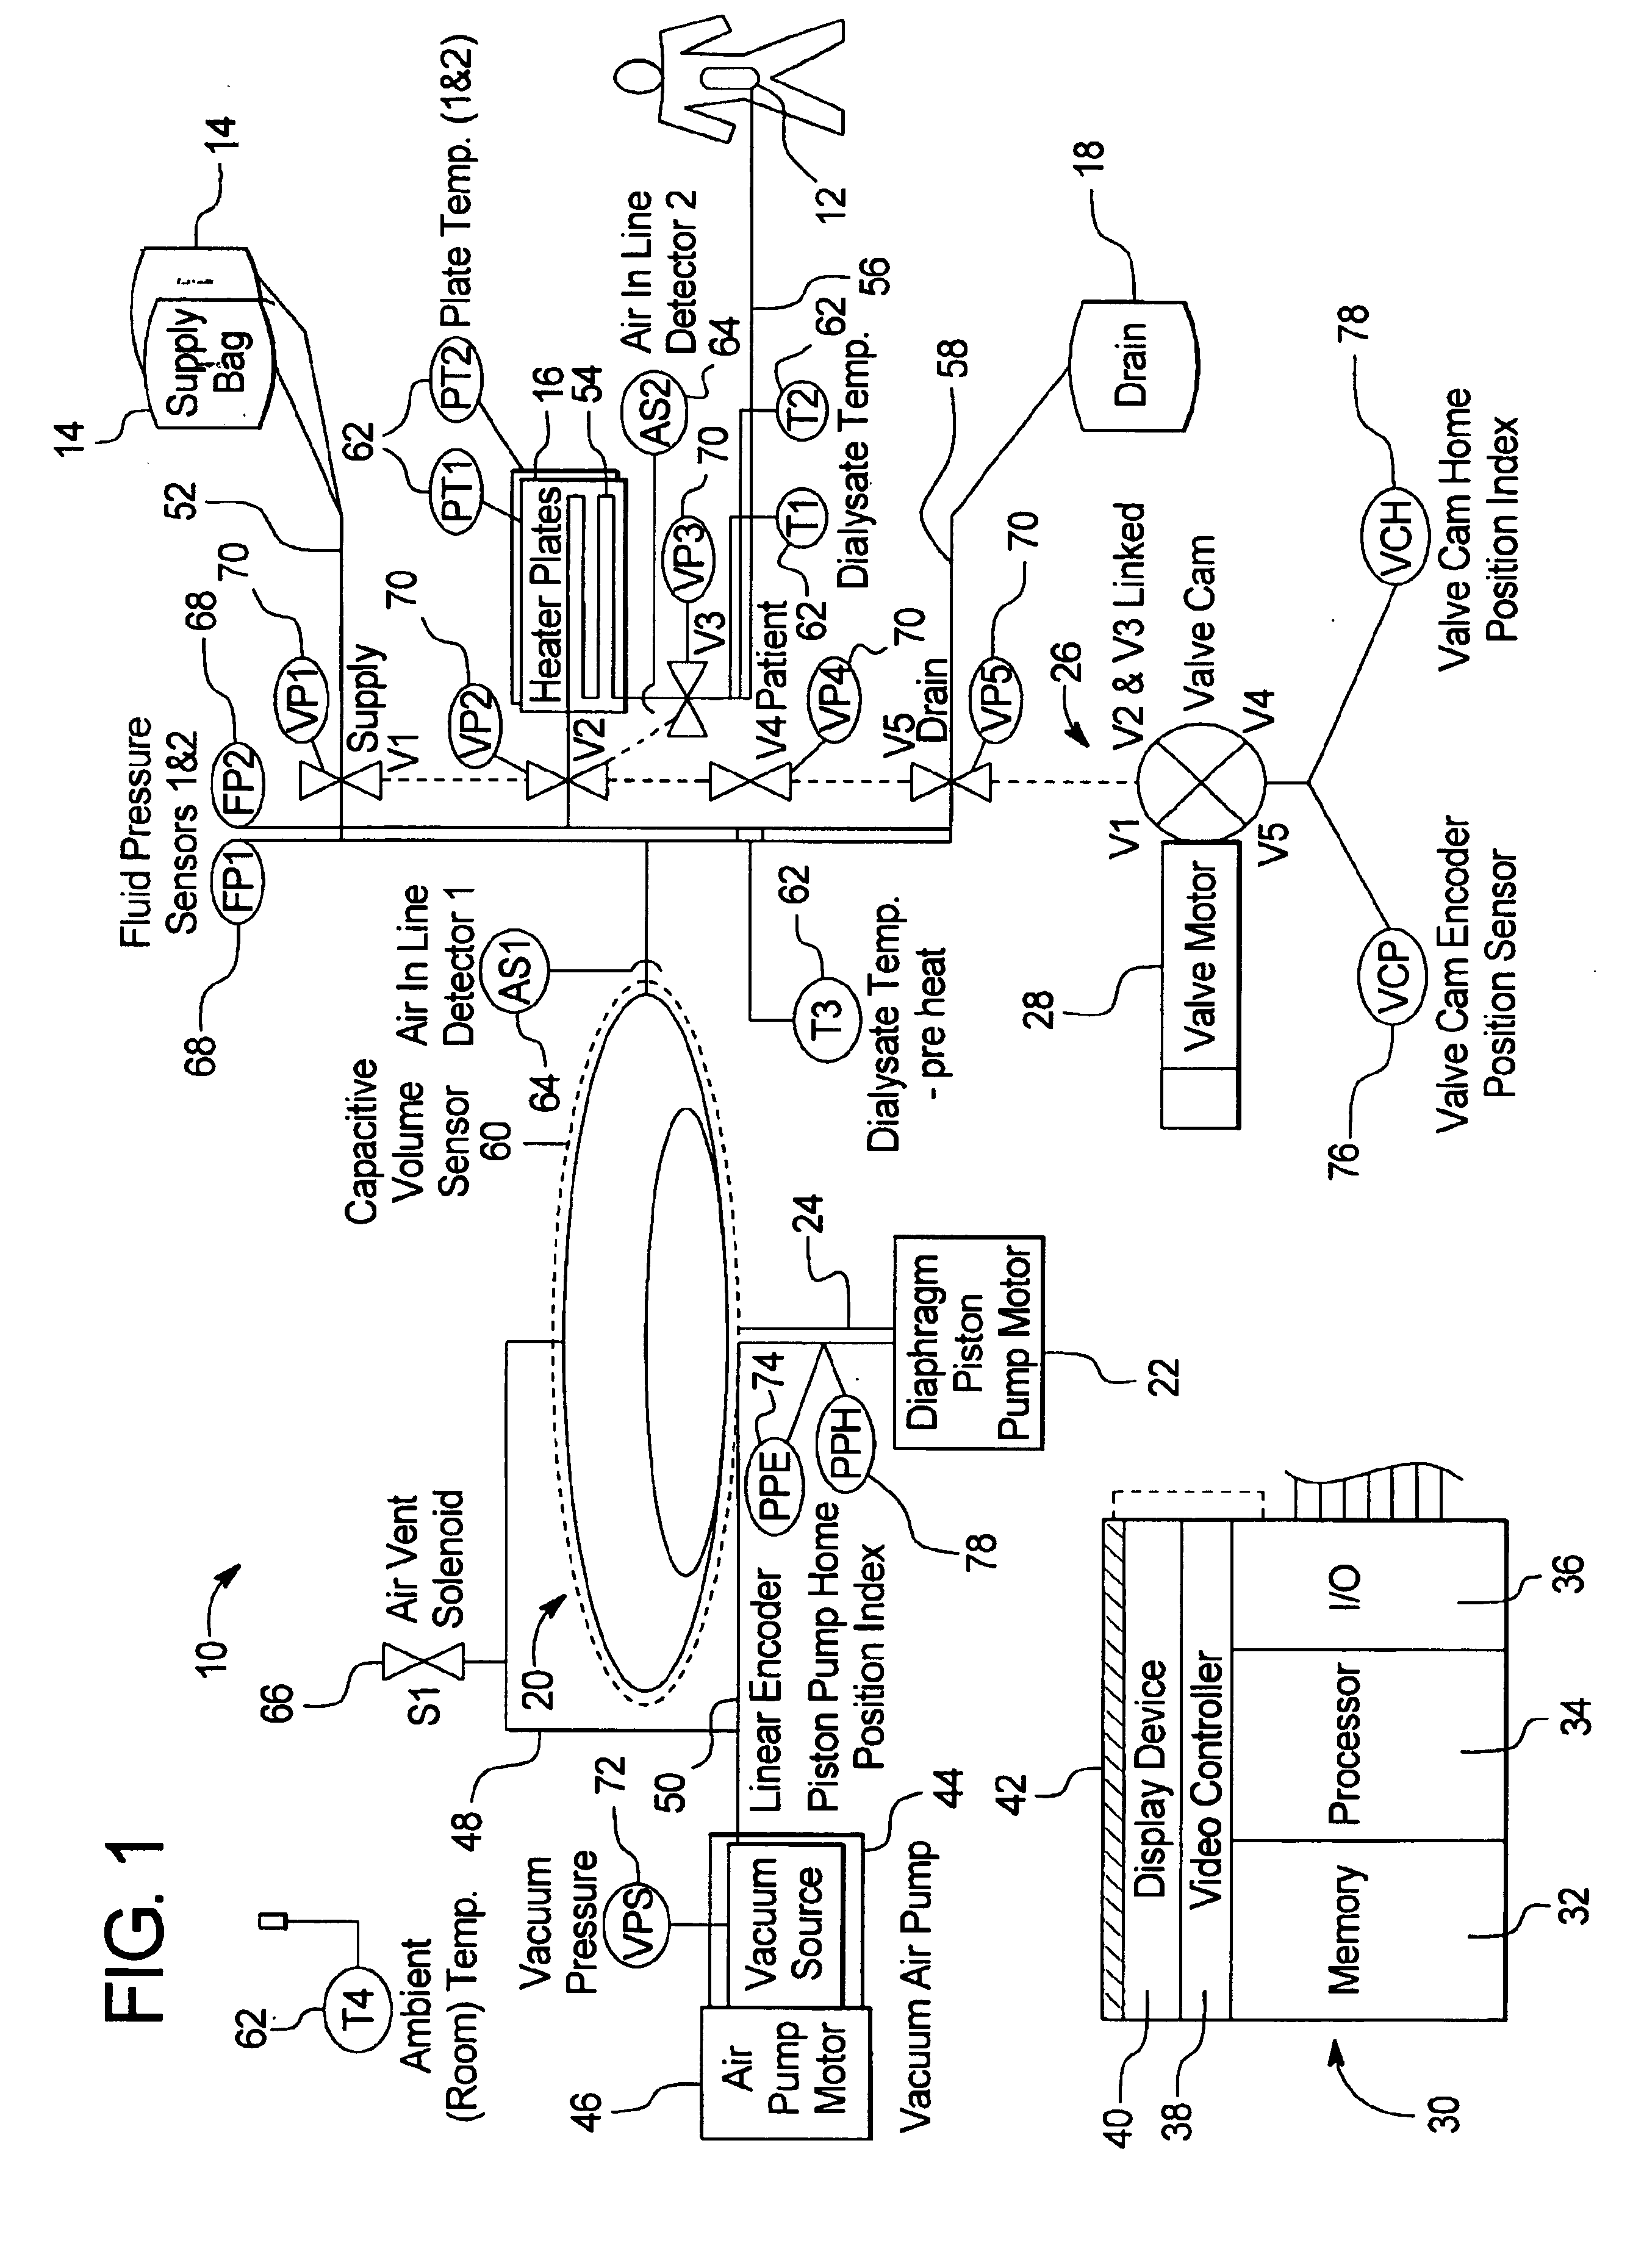 Method and apparatus for controlling medical fluid pressure